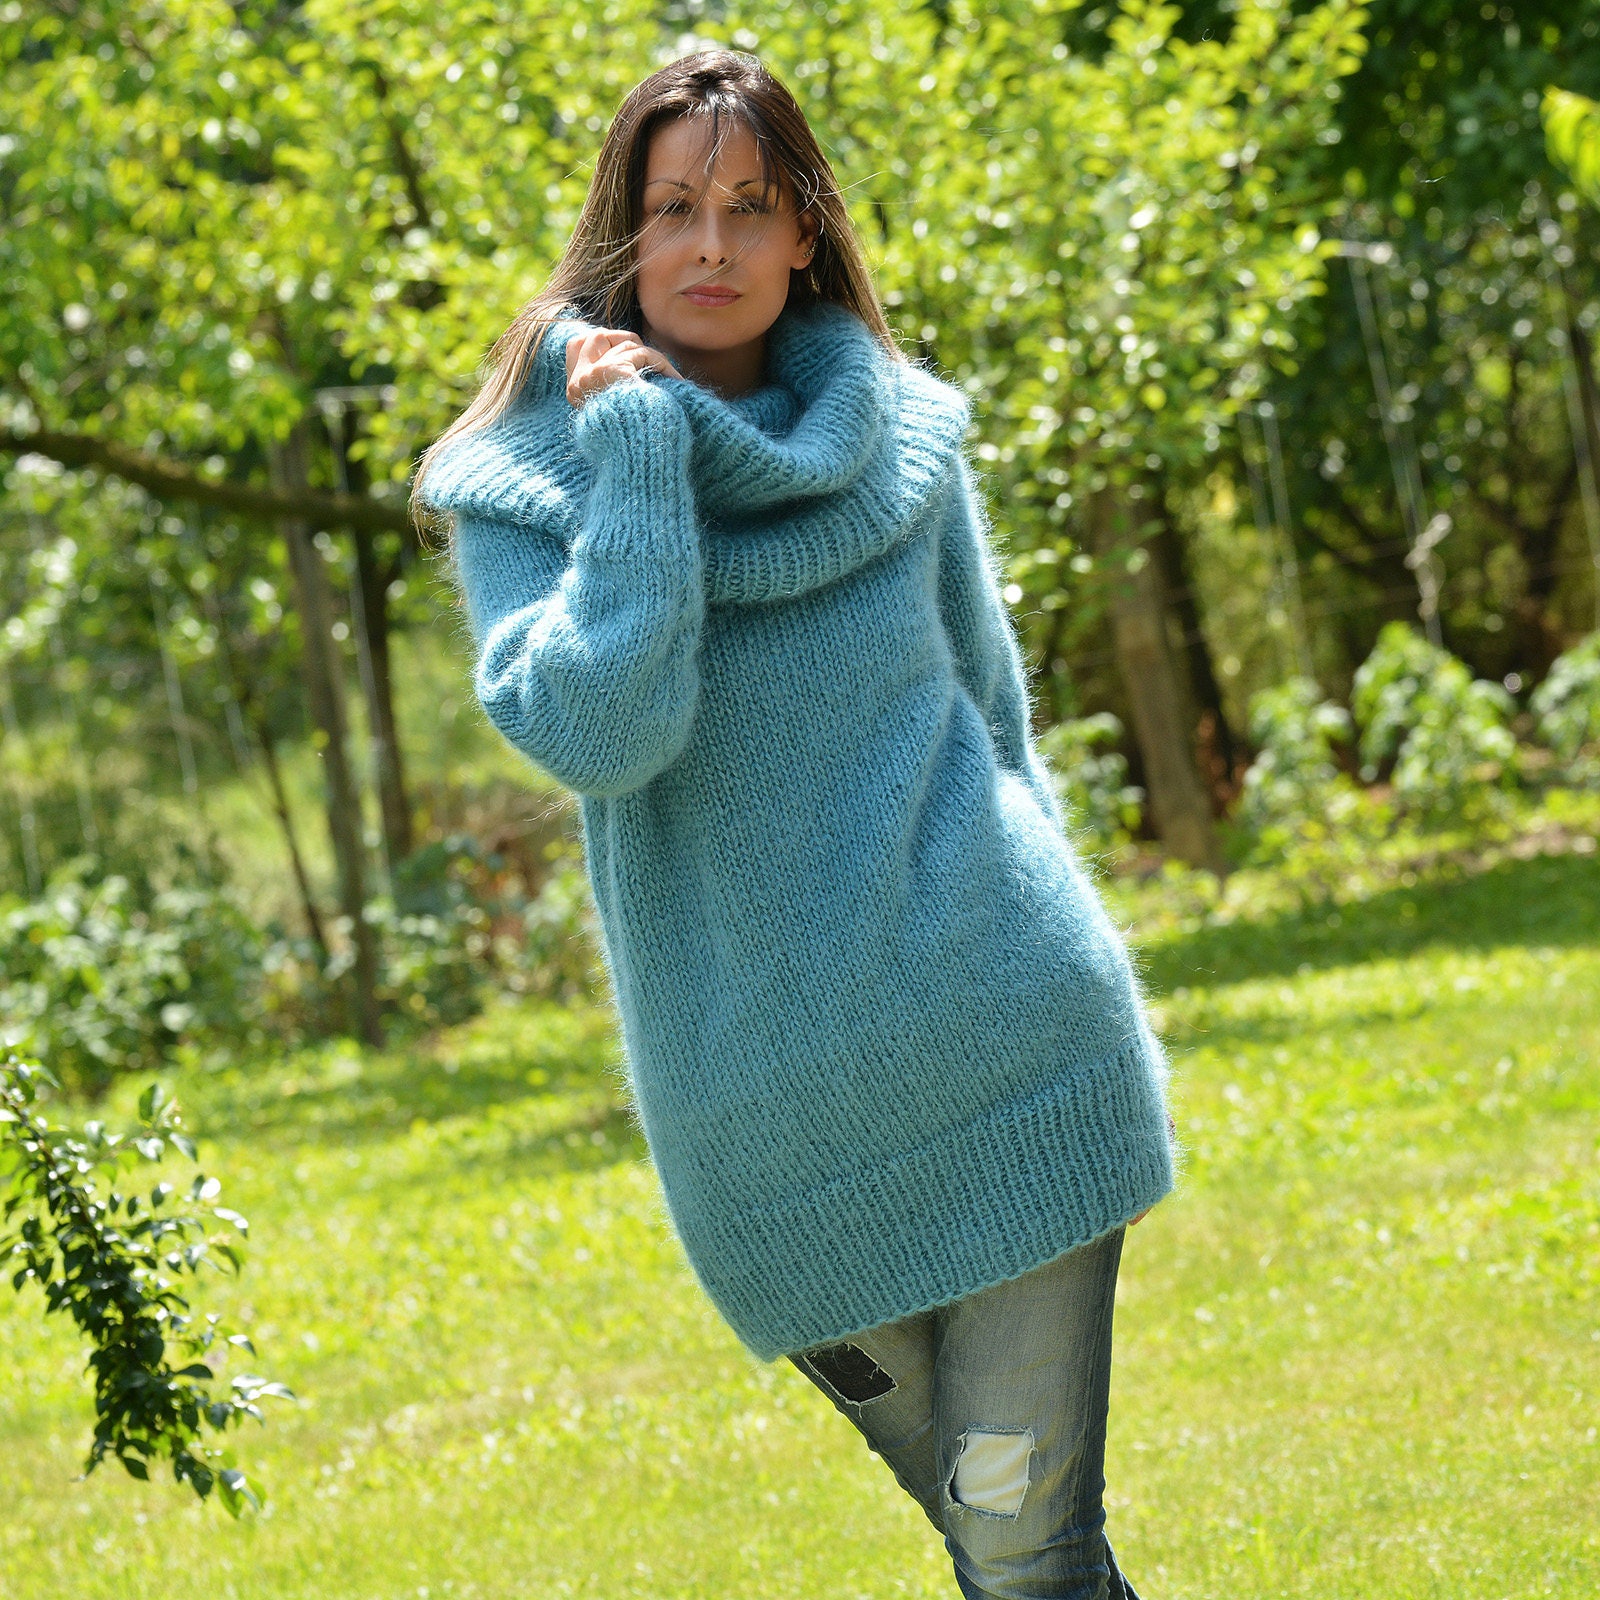 Cowl Neck Sweater, Hand Knitted Mohair Pullover, Turtleneck Blue Fuzzy Jumper  Jersey by EXTRAVAGANTZA -  Denmark